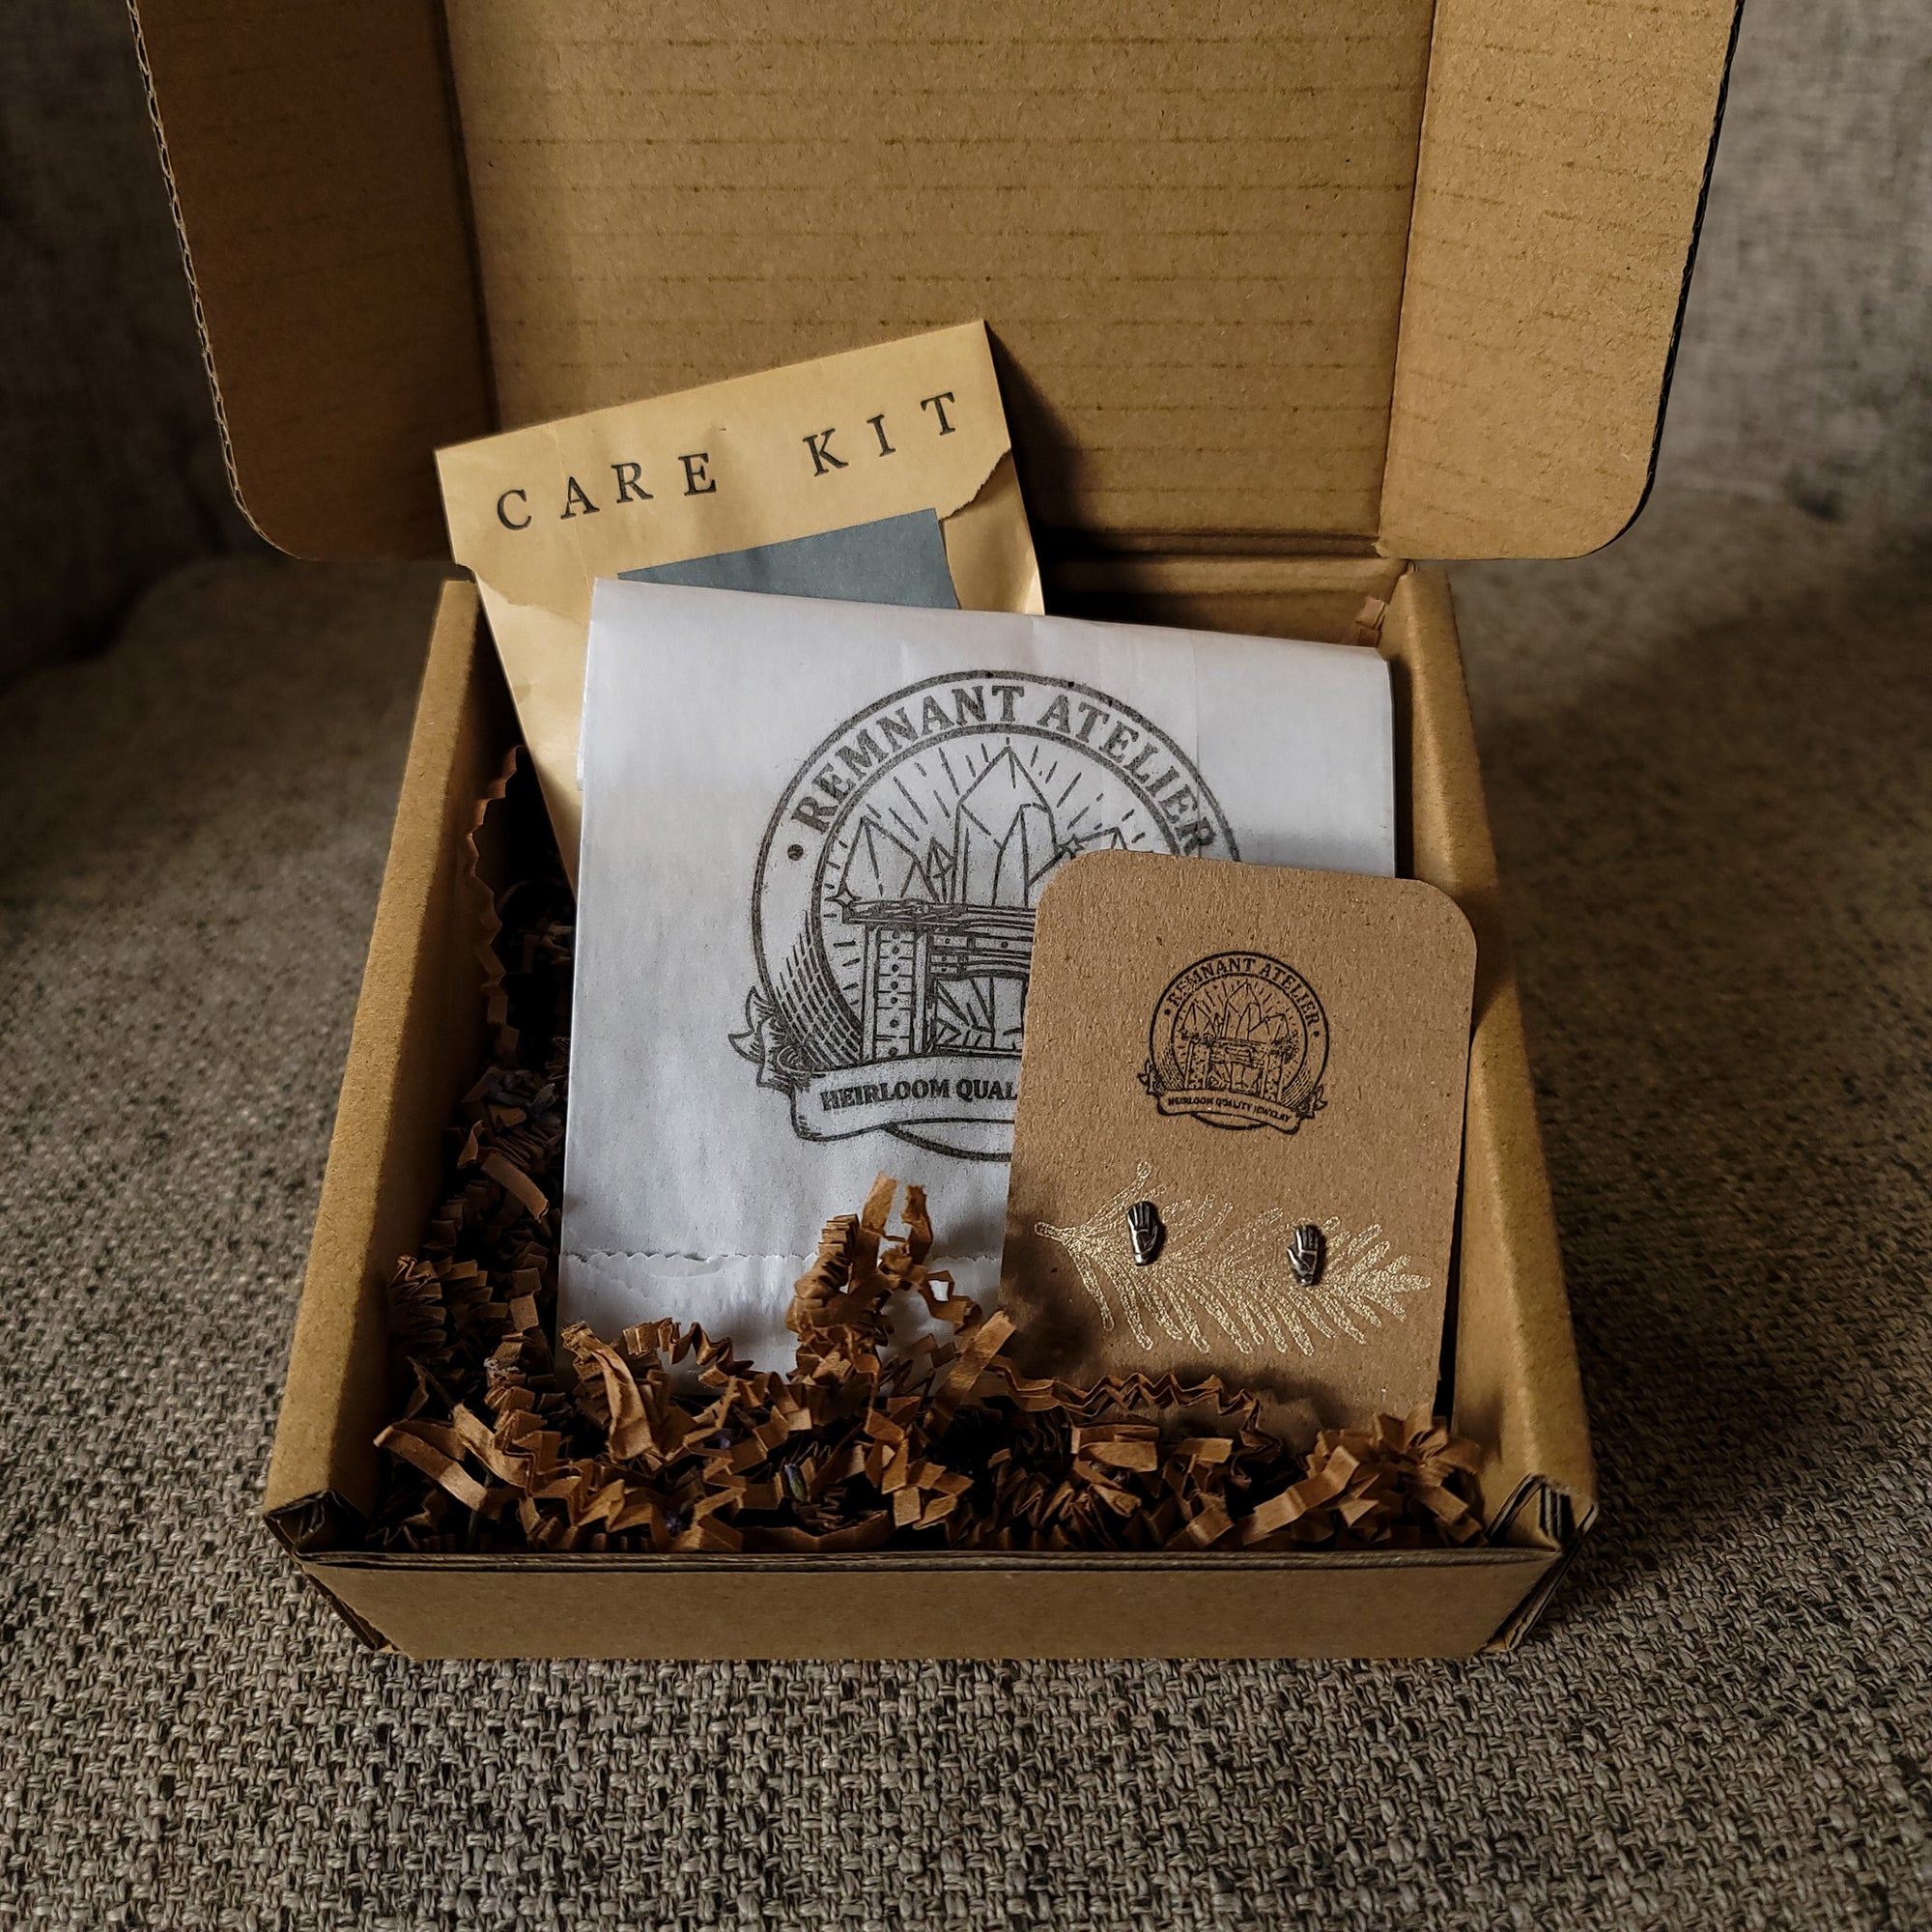 This photo shows a pair of handmade sterling silver hand shaped stud earrings displayed on a cardboard earring card inside a cardboard box, surrounded by shredded cardboard. The package also includes a care kit to keep the jewelry in top condition.